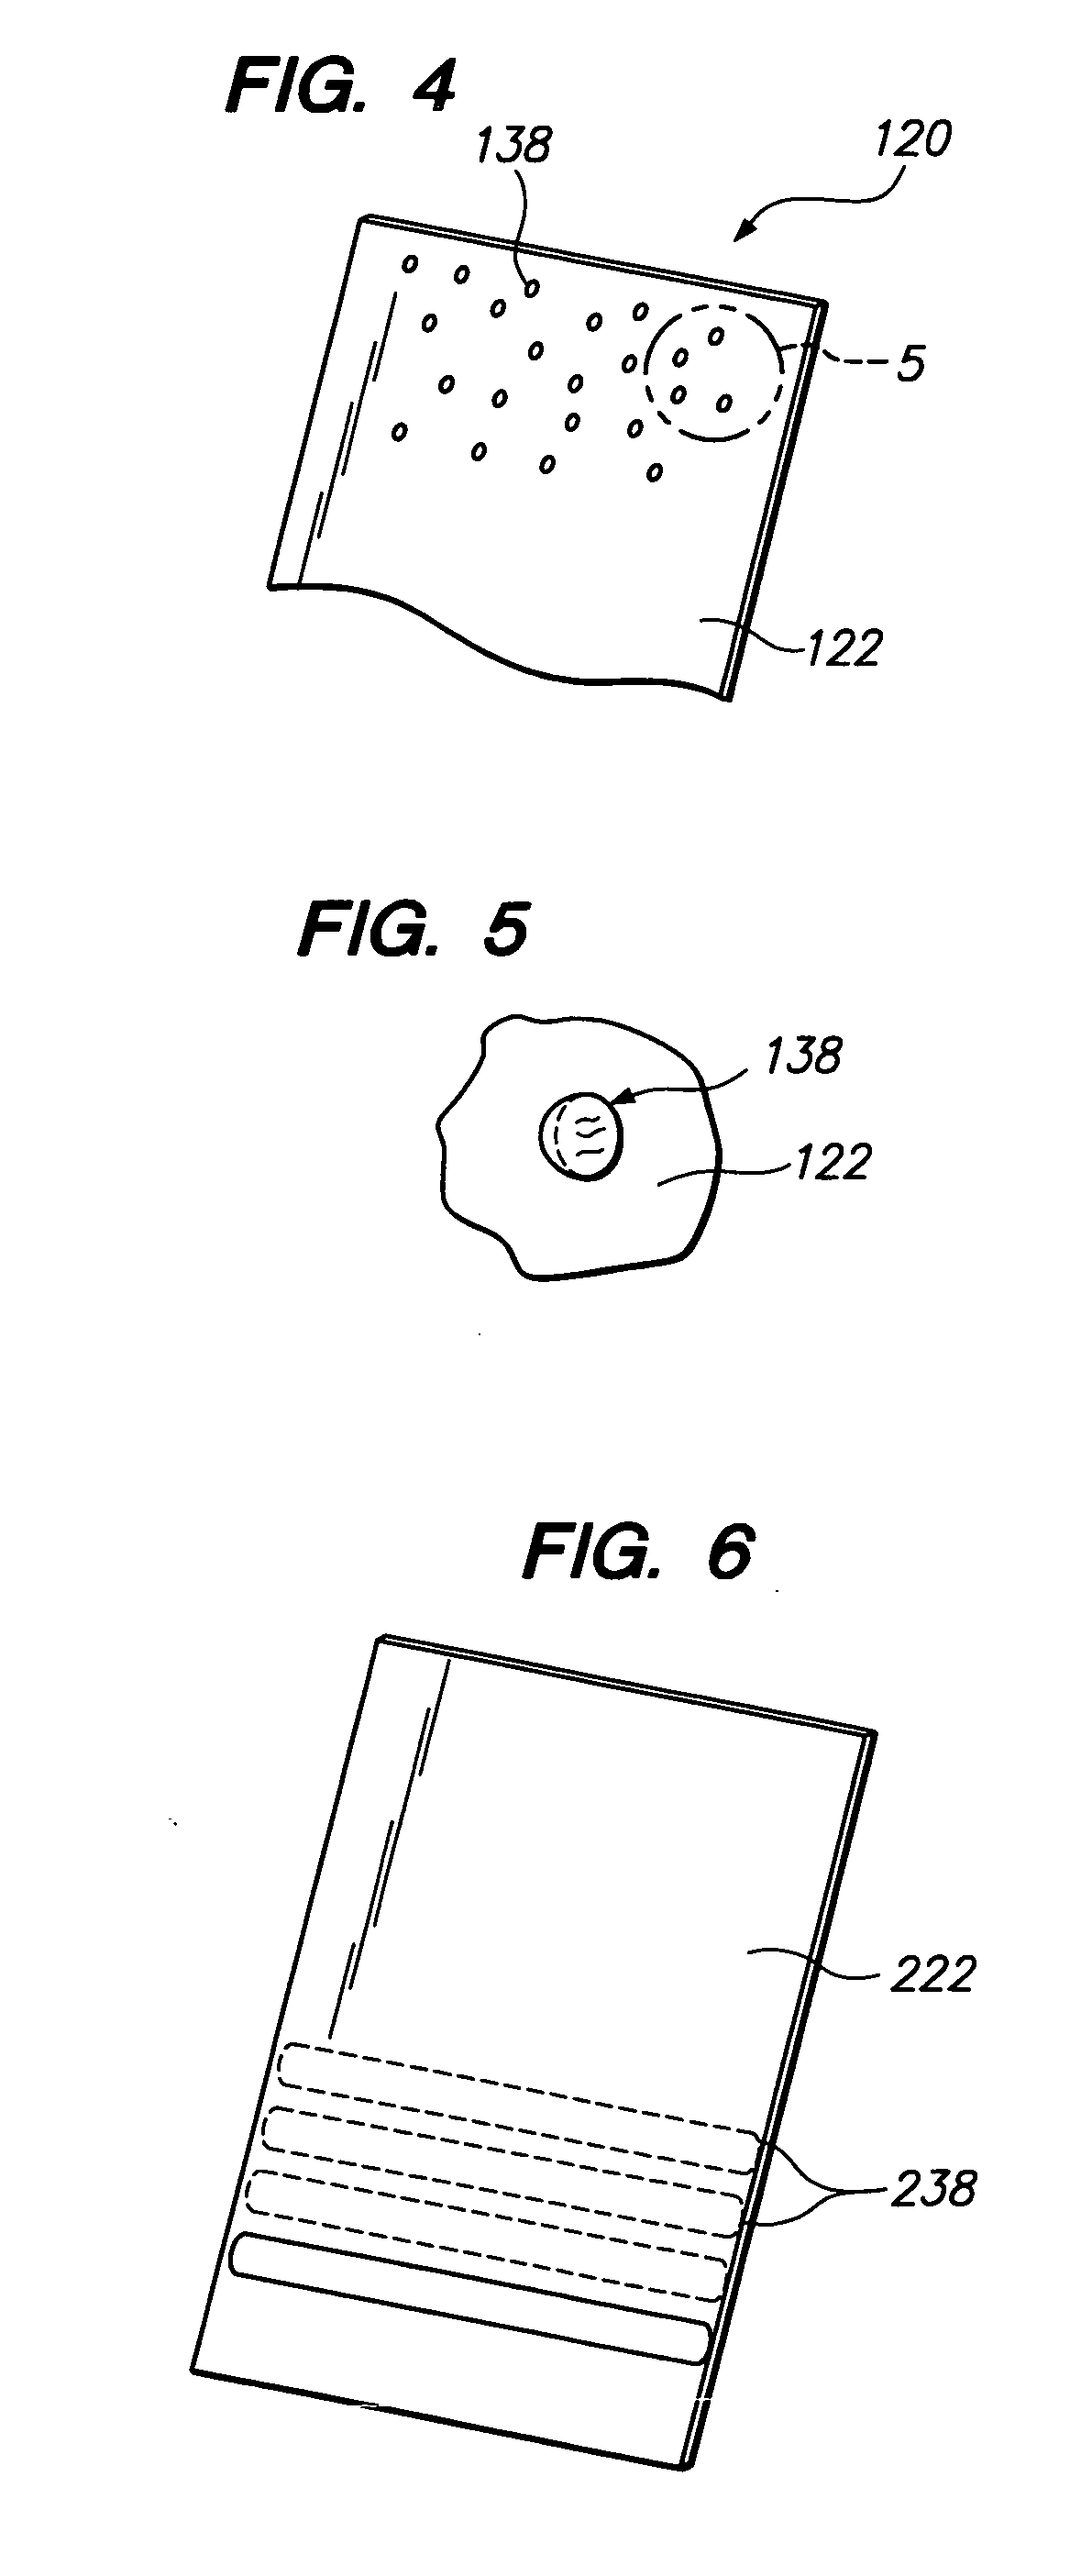 Method and apparatus for lubricating a shredding device